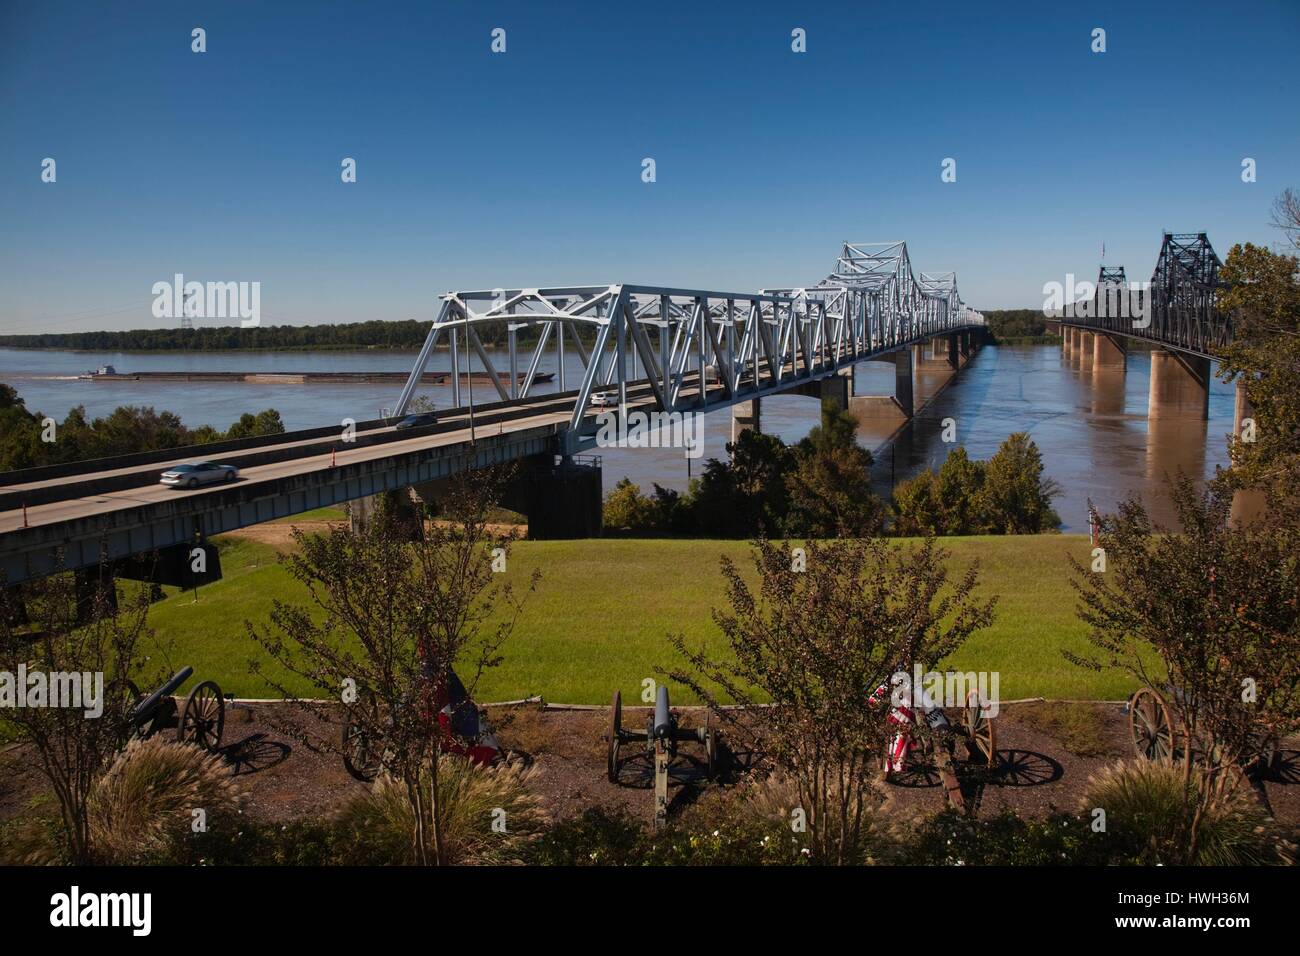 United States, Mississippi, Vicksburg, I-20 Highway and US-80 bridges across the Mississippi River with river barge traffic Stock Photo